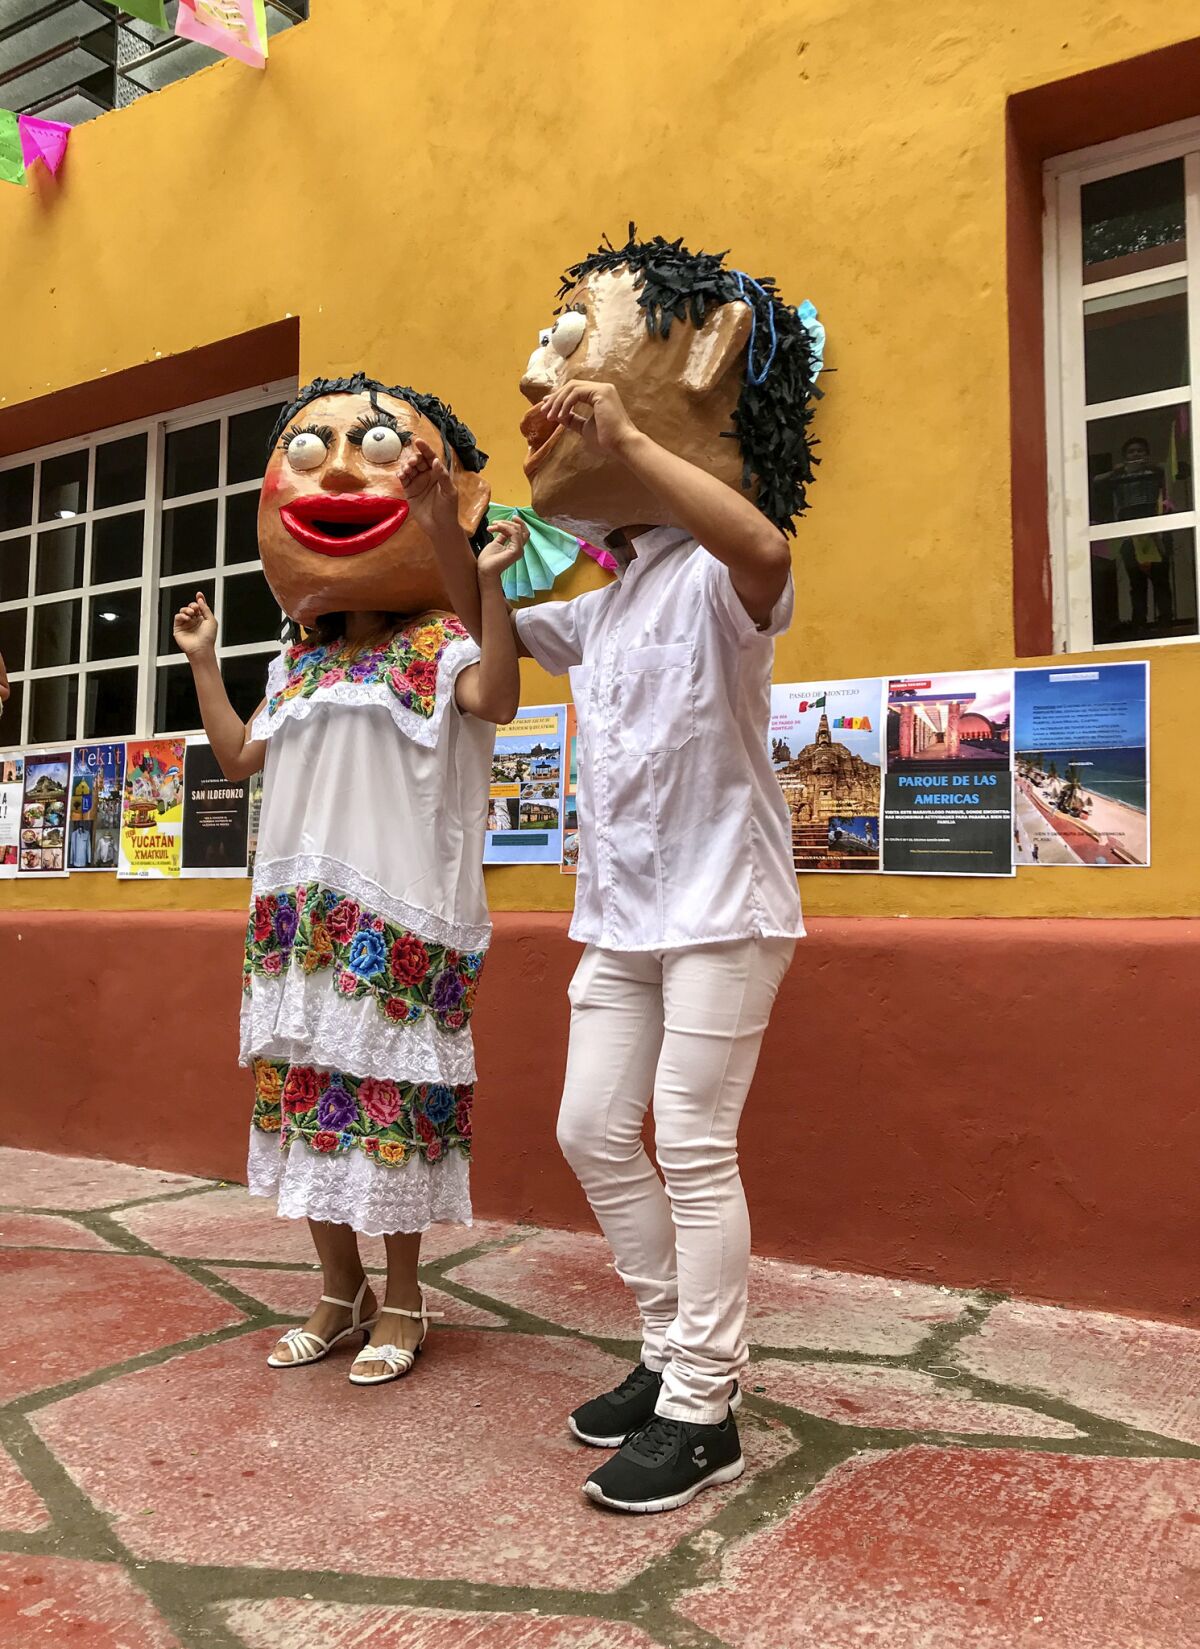 Two traditional "dancing dolls" at a festival in a Merida cultural center.